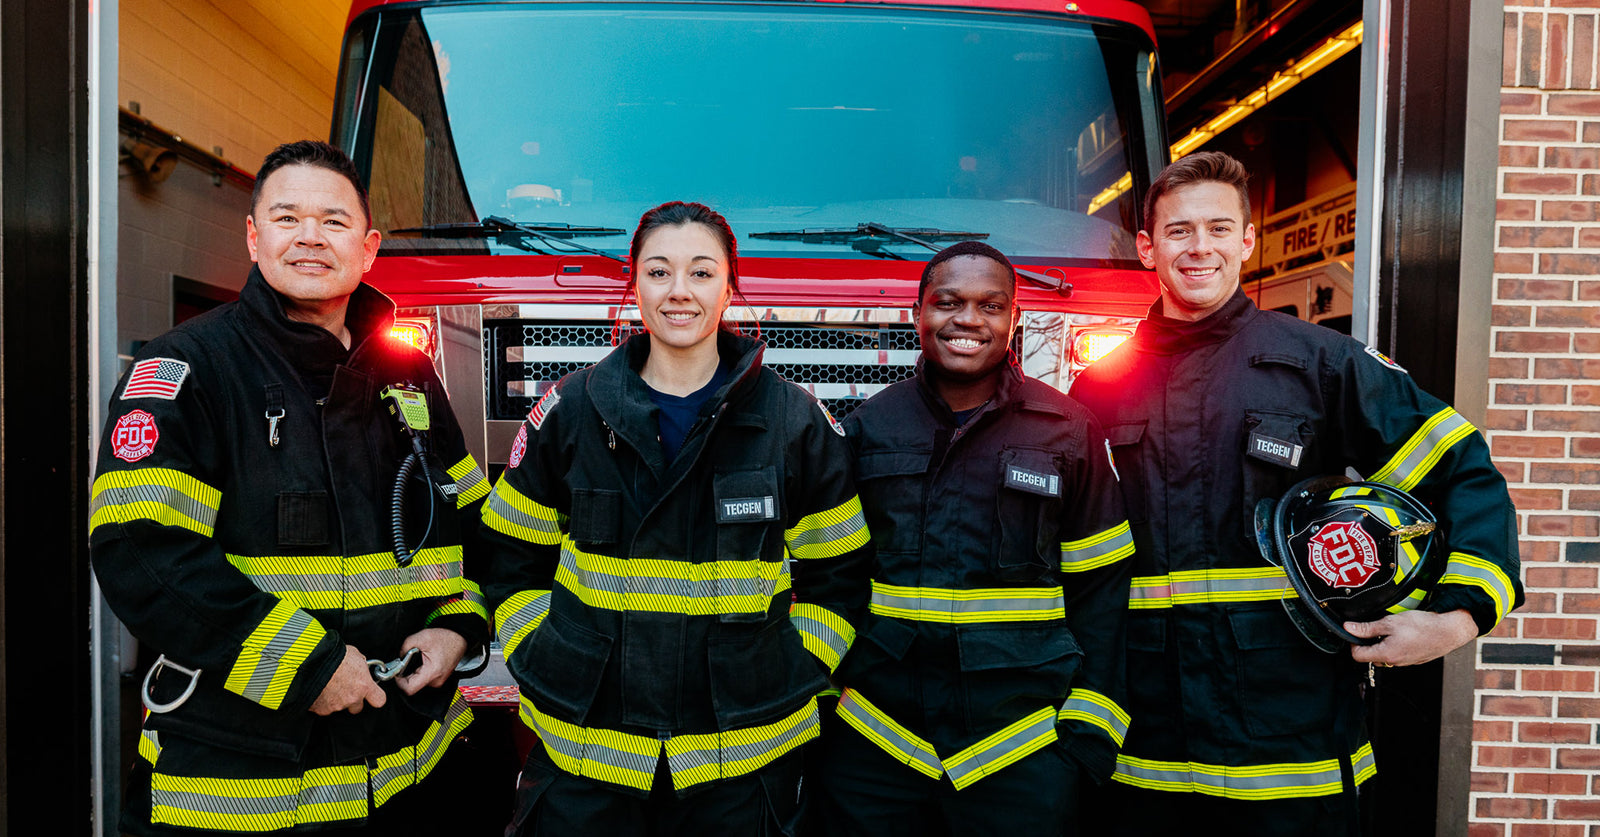 Group of firefighters standing together in front of a fire truck.